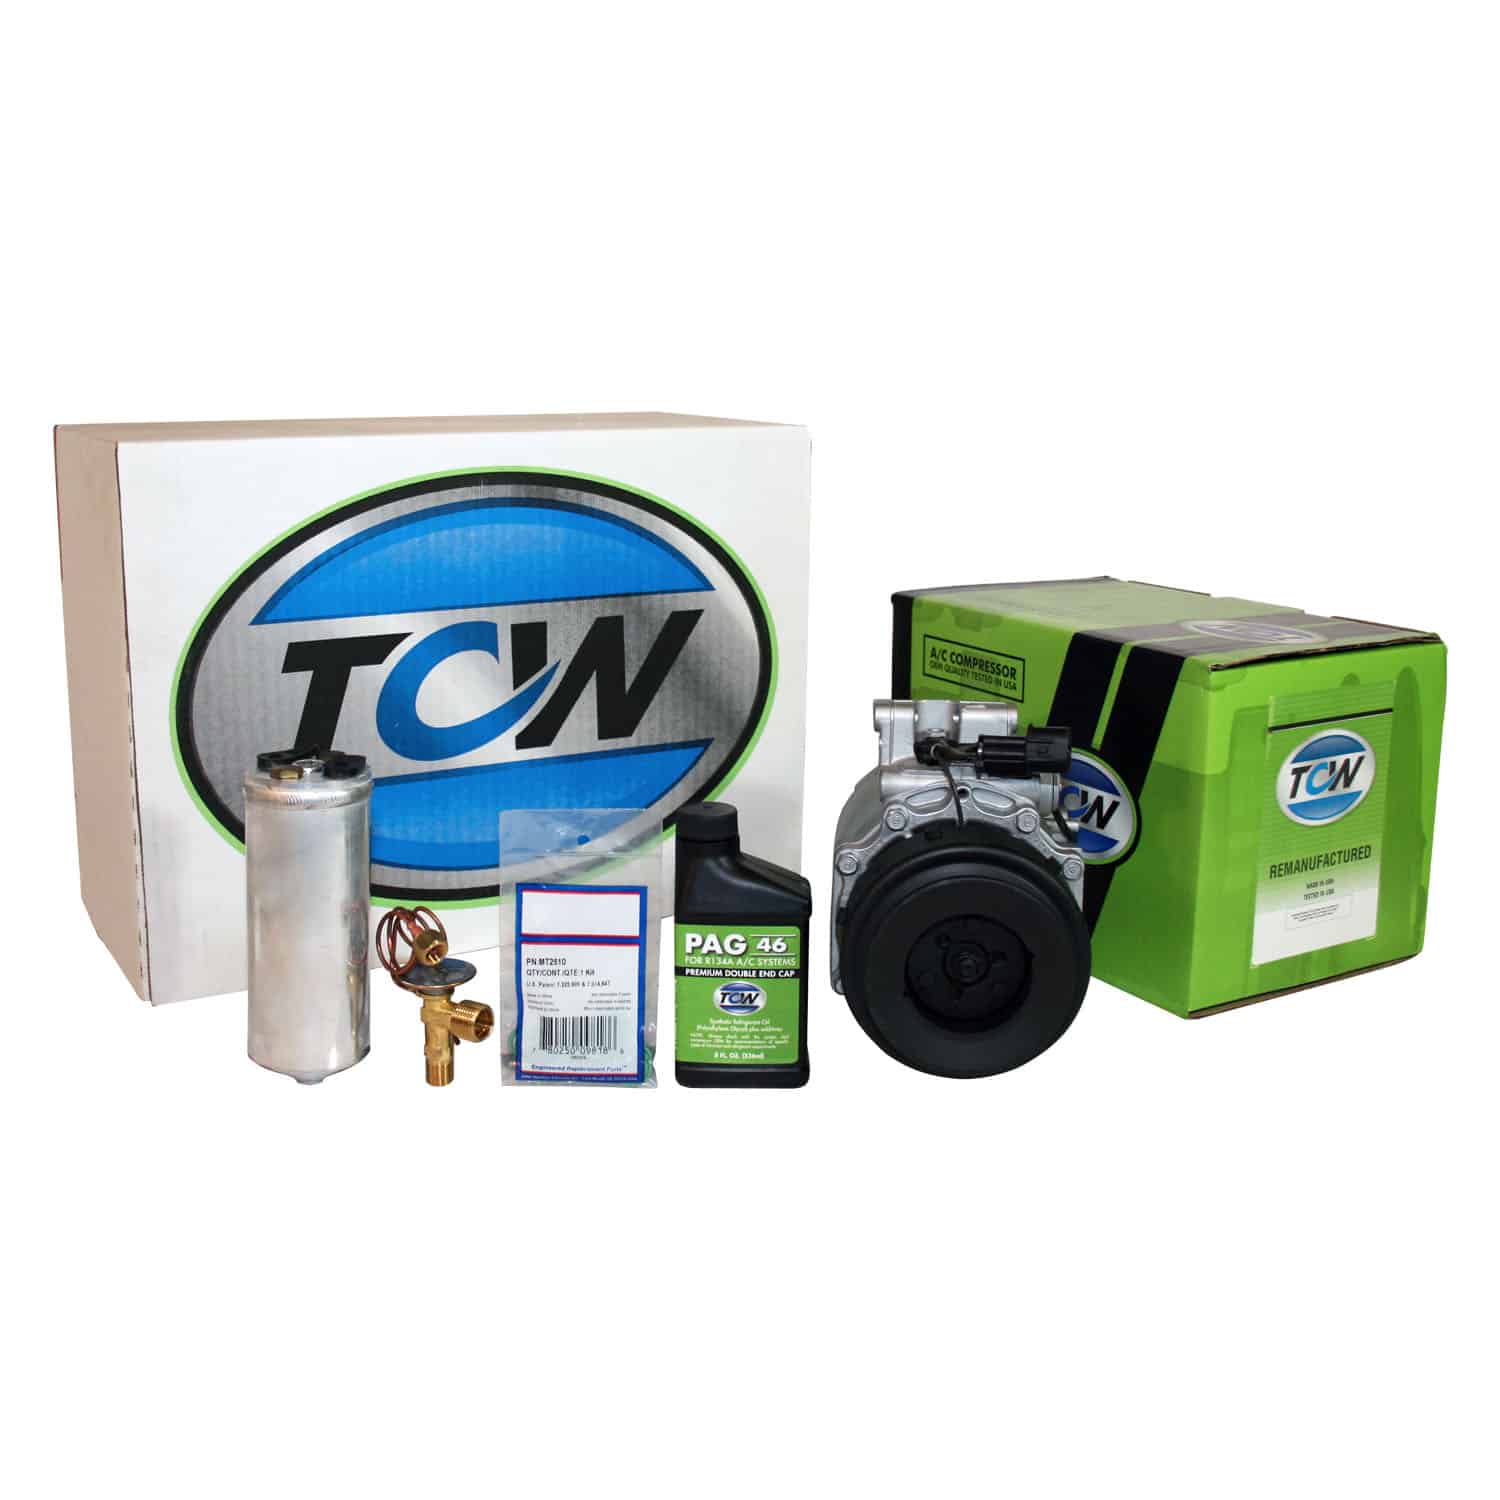 TCW Vehicle A/C Kit K1000268R Remanufactured